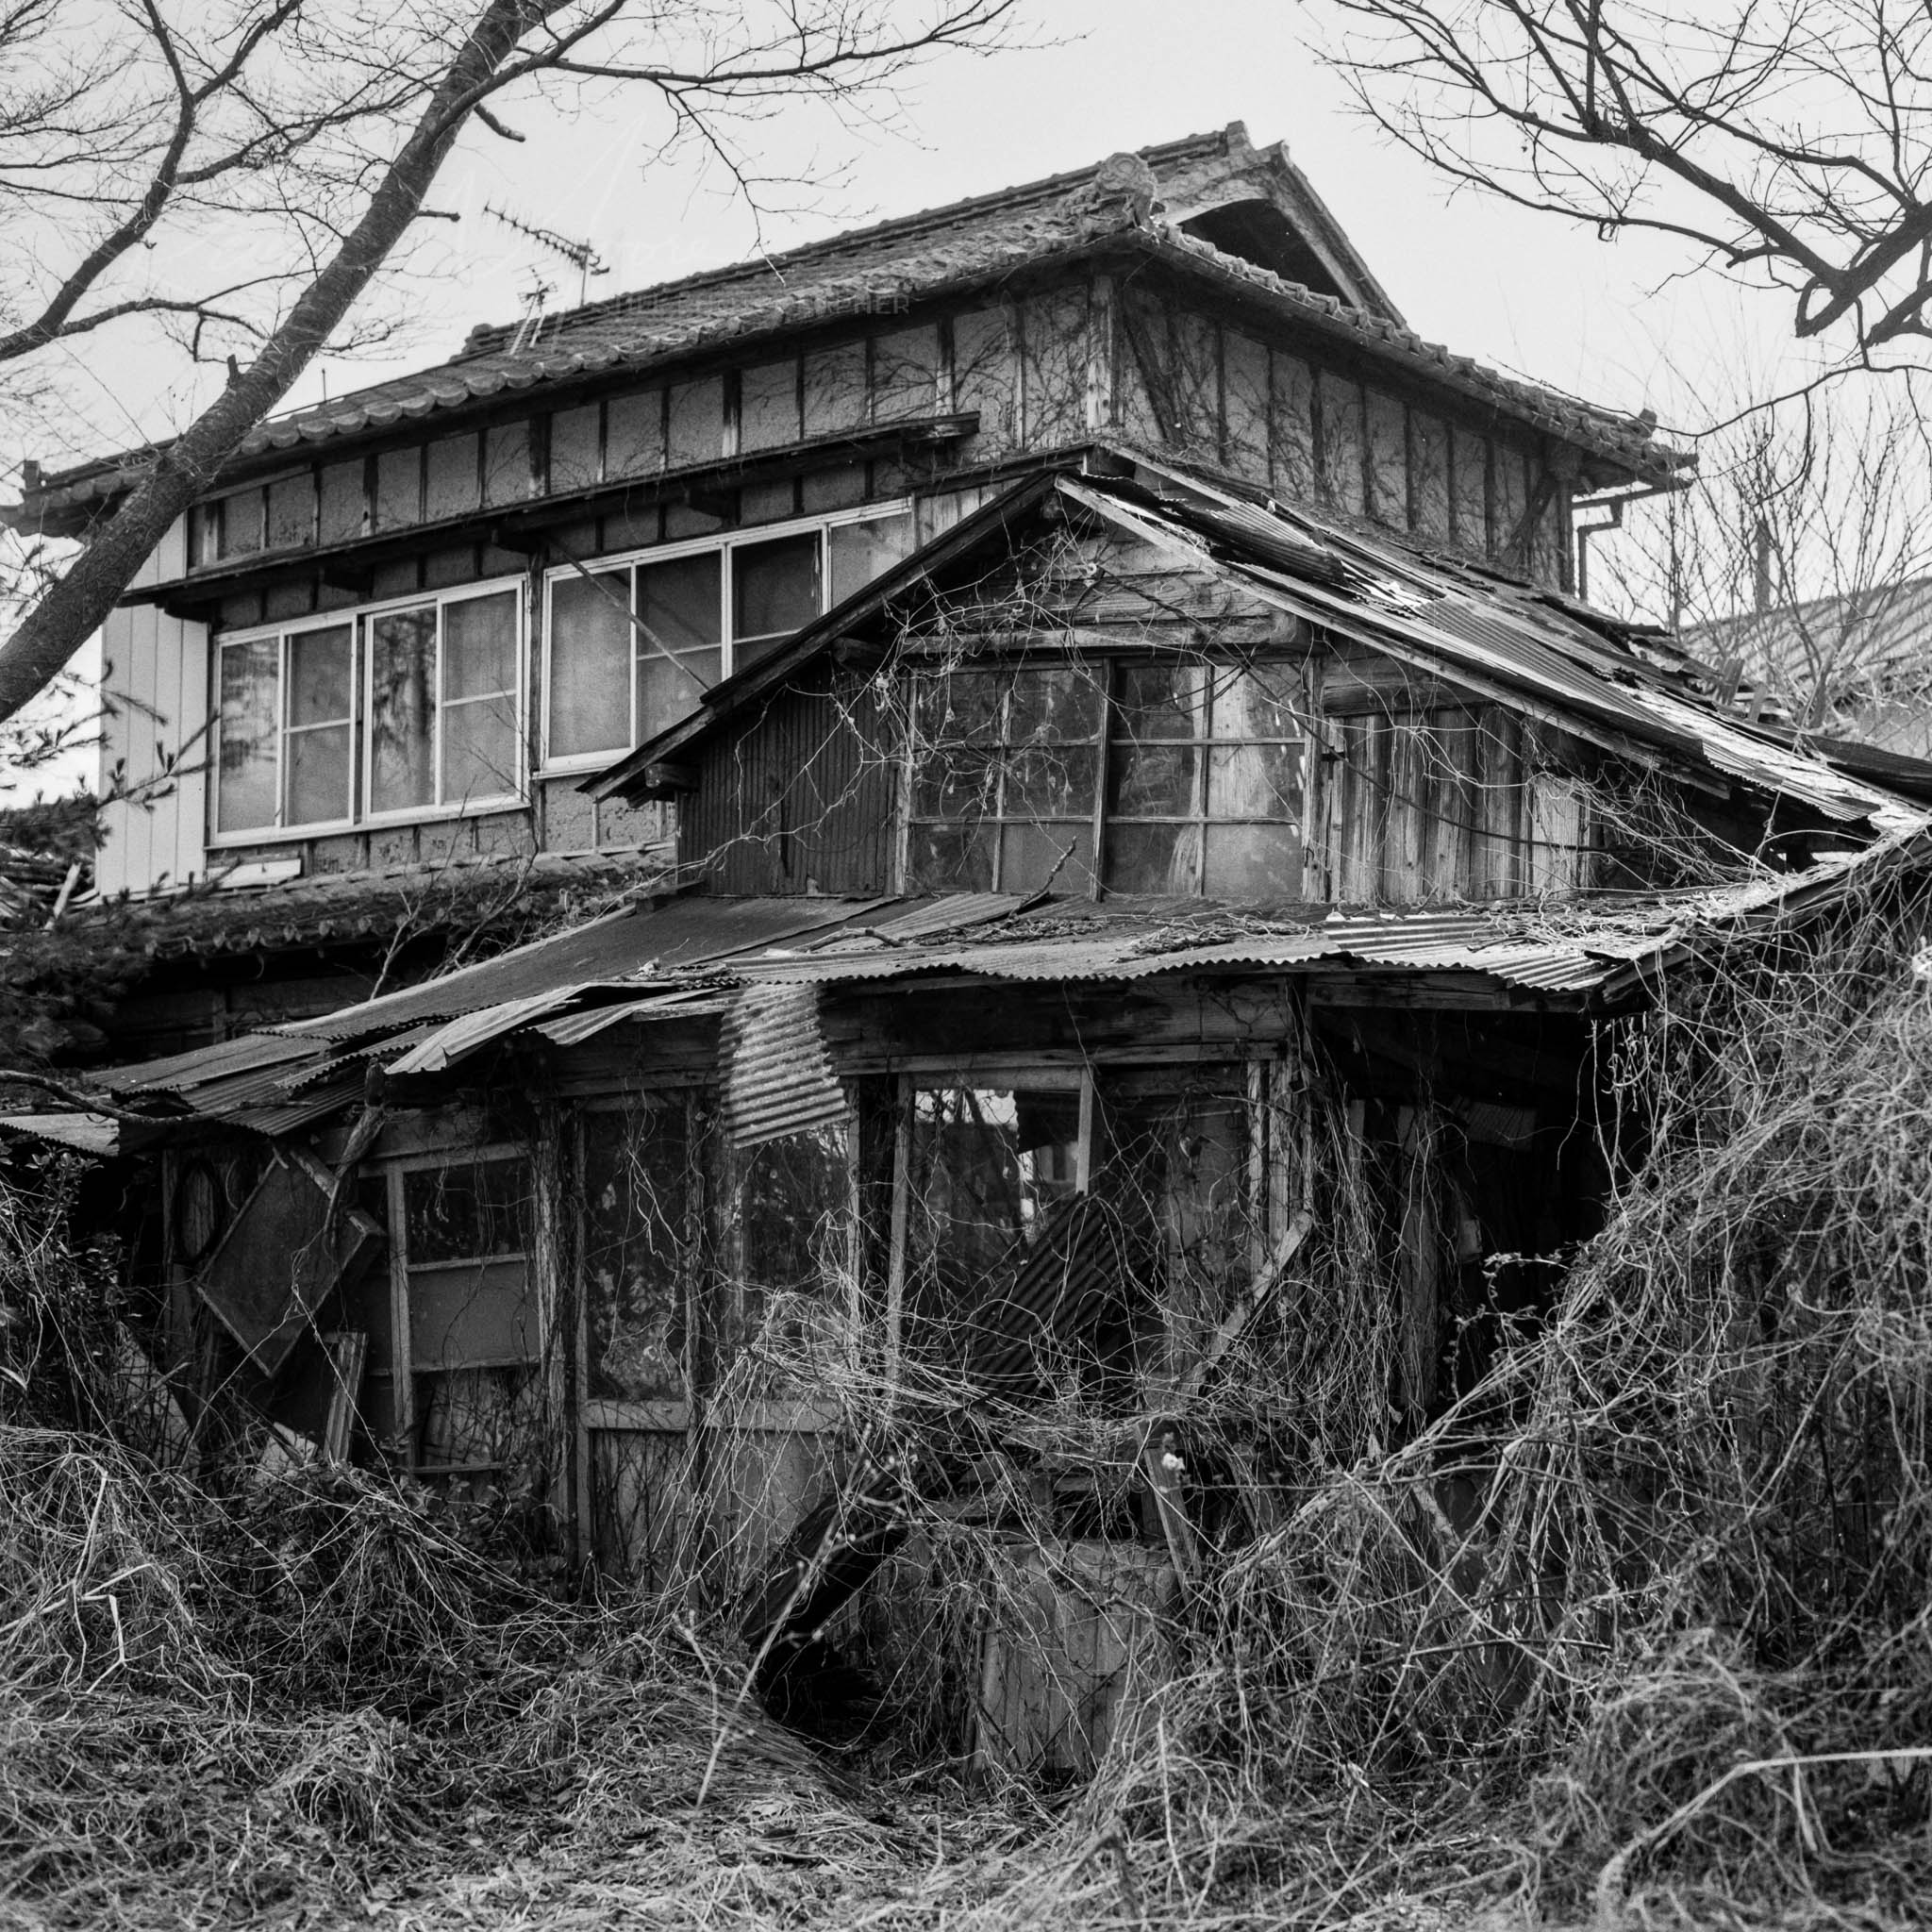 Neglected two-story house overgrown with vegetation in a black and white photograph.